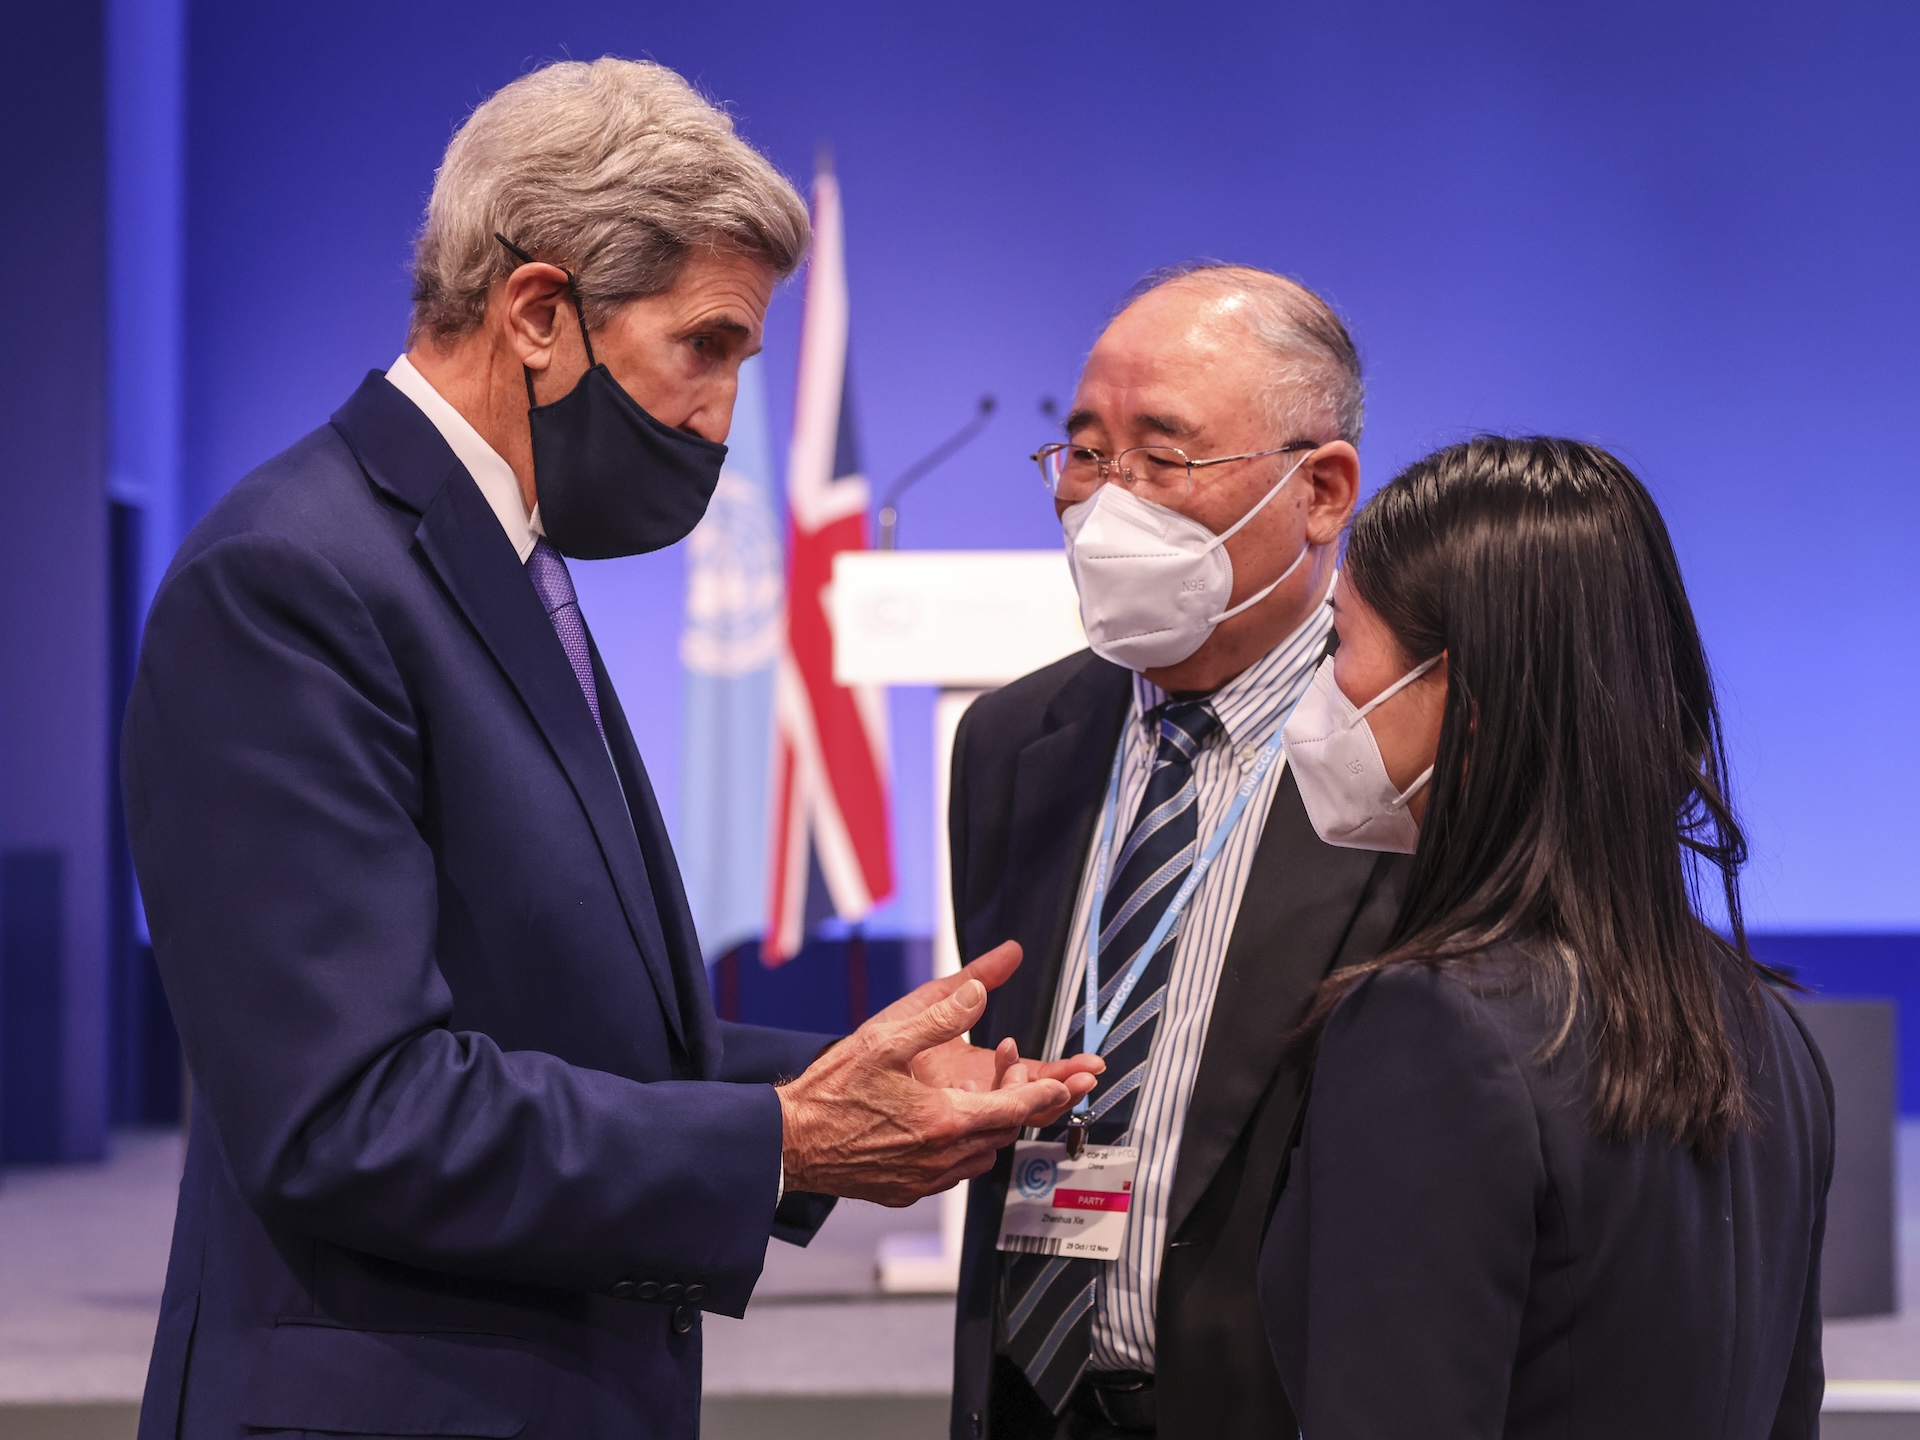 13/11/2021. Glasgow, United Kingdom. The U.S. Special Presidential Envoy for Climate, John Kerry talks to the Chinese special climate envoy Xie Zhenhua in an informal brush by at COP26. Picture by Tim Hammond / No 10 Downing Street